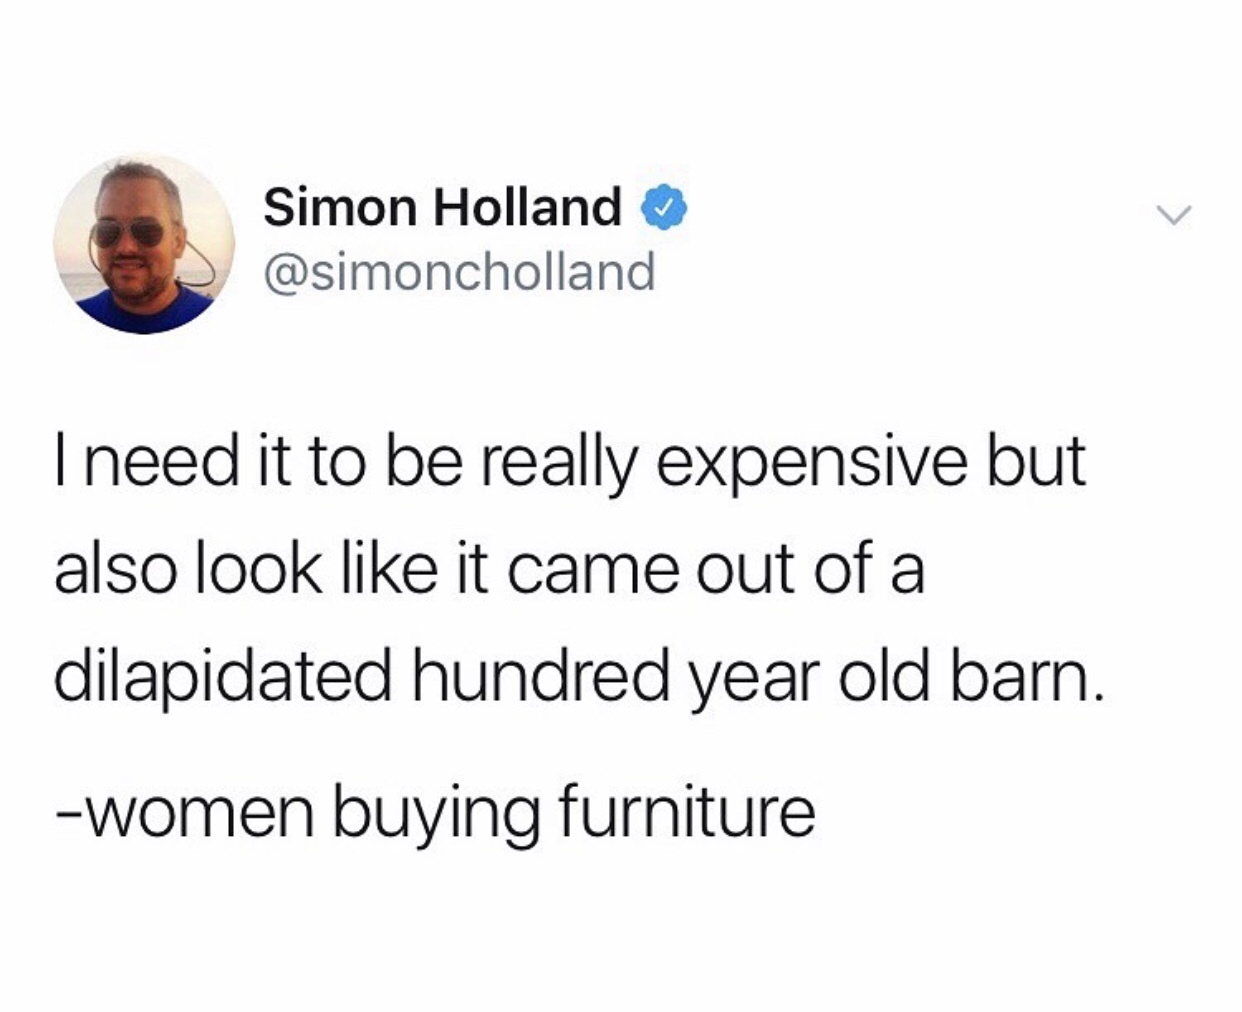 Humour - Simon Holland I need it to be really expensive but also look it came out of a dilapidated hundred year old barn. women buying furniture